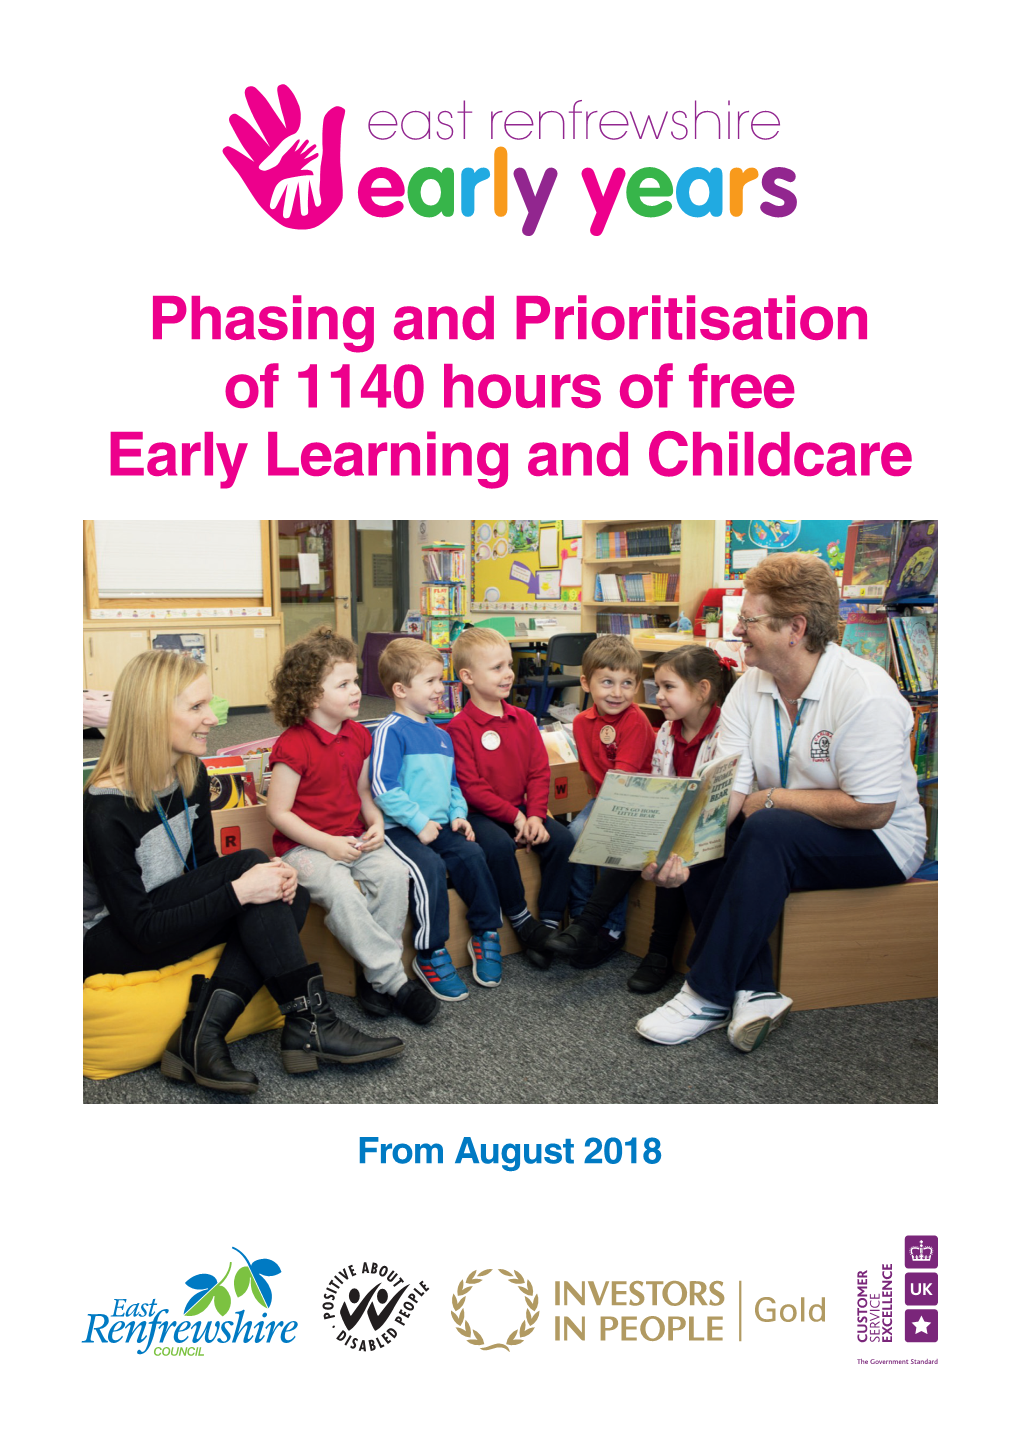 Phasing and Prioritisation of 1140 Hours of Free Early Learning and Childcare